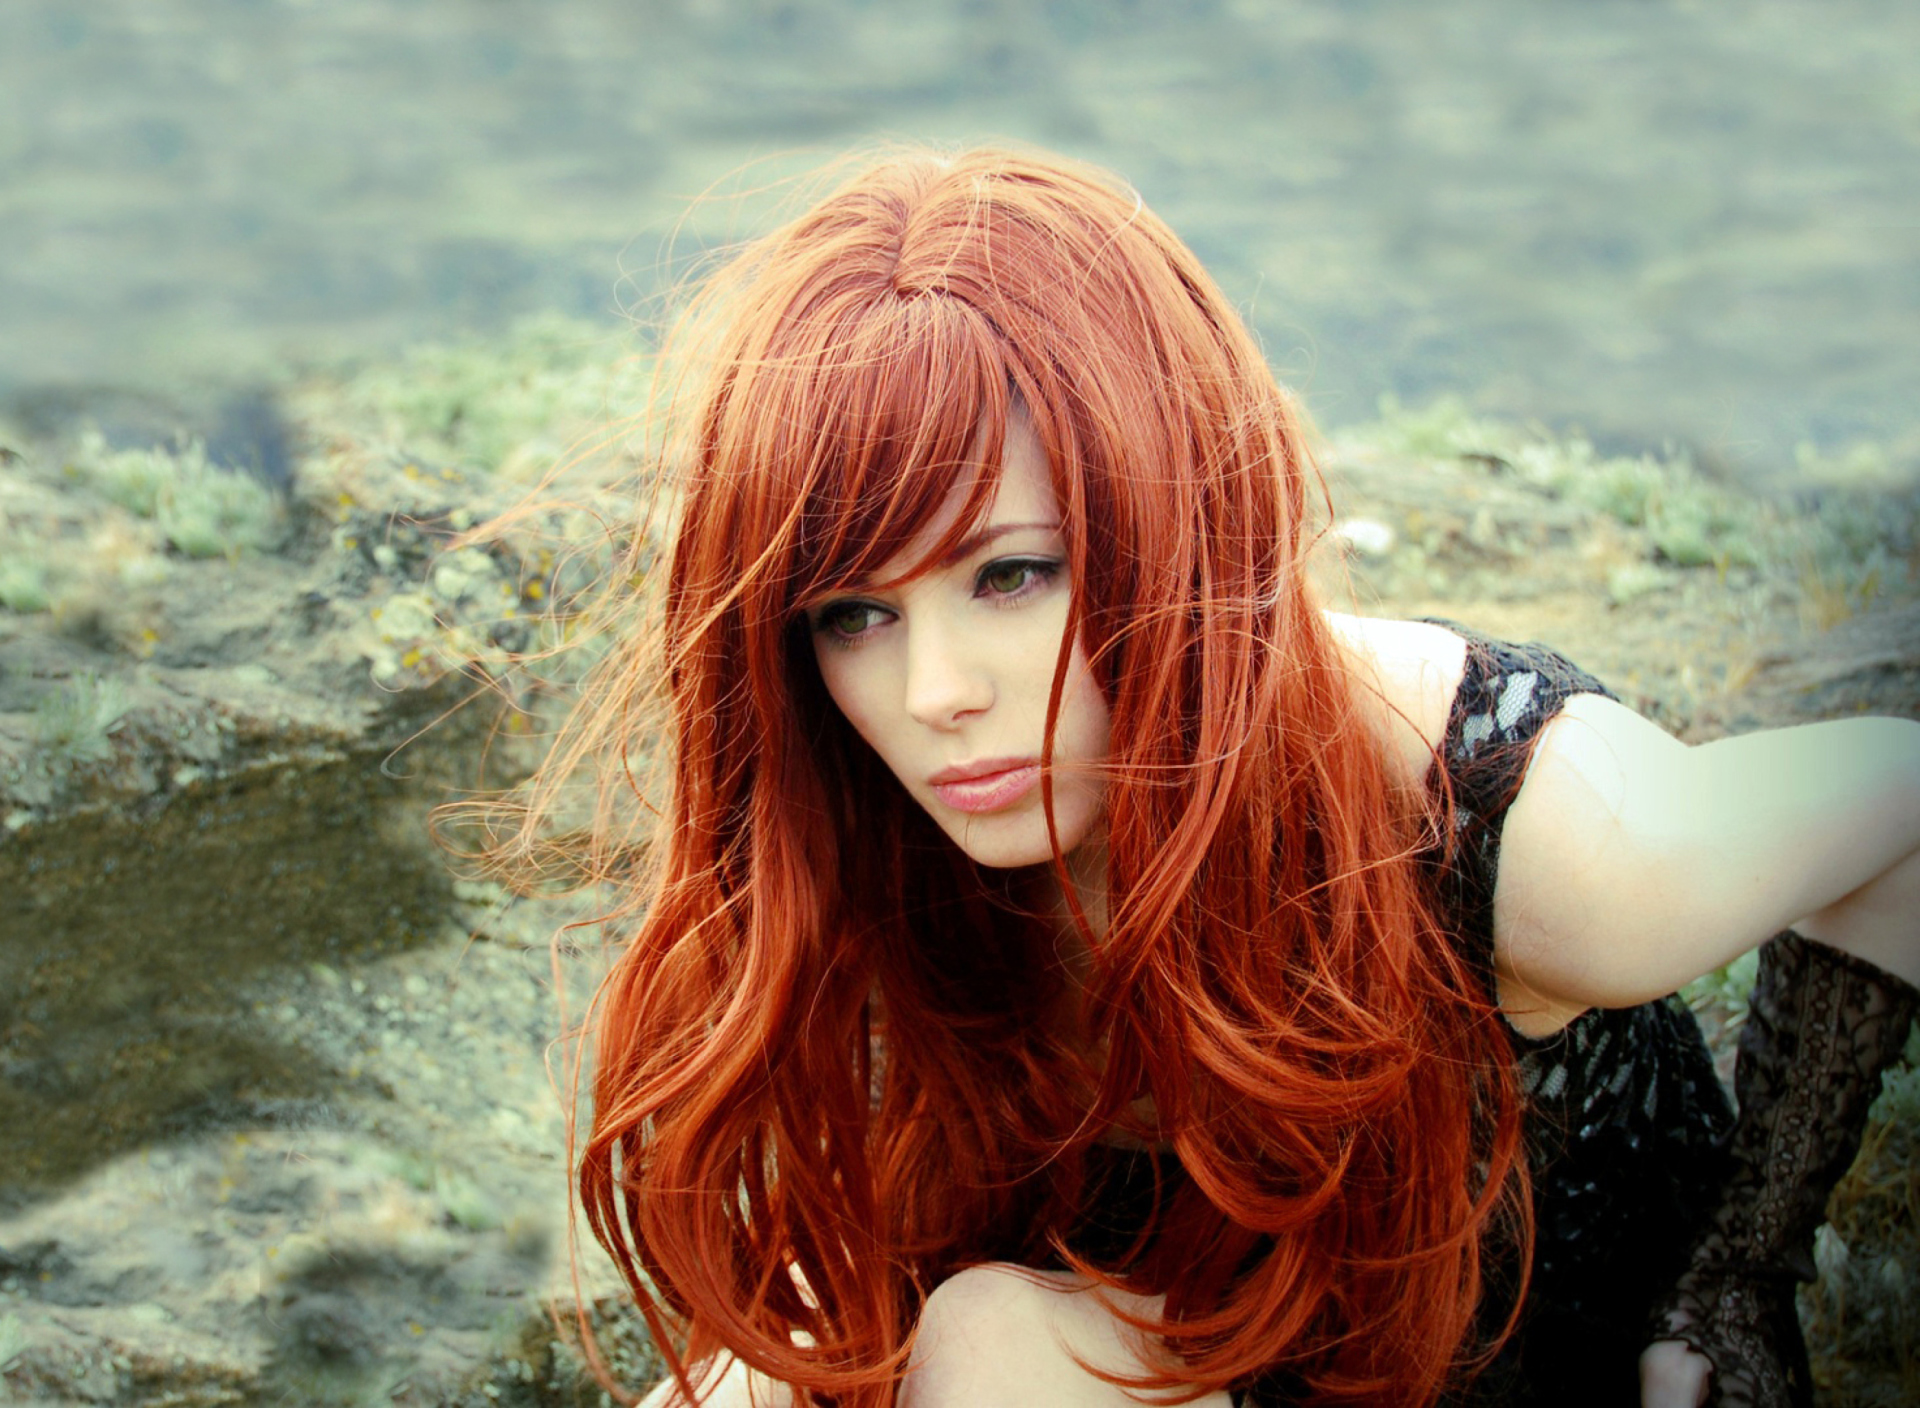 Gorgeous Red Hair Girl With Green Eyes screenshot #1 1920x1408